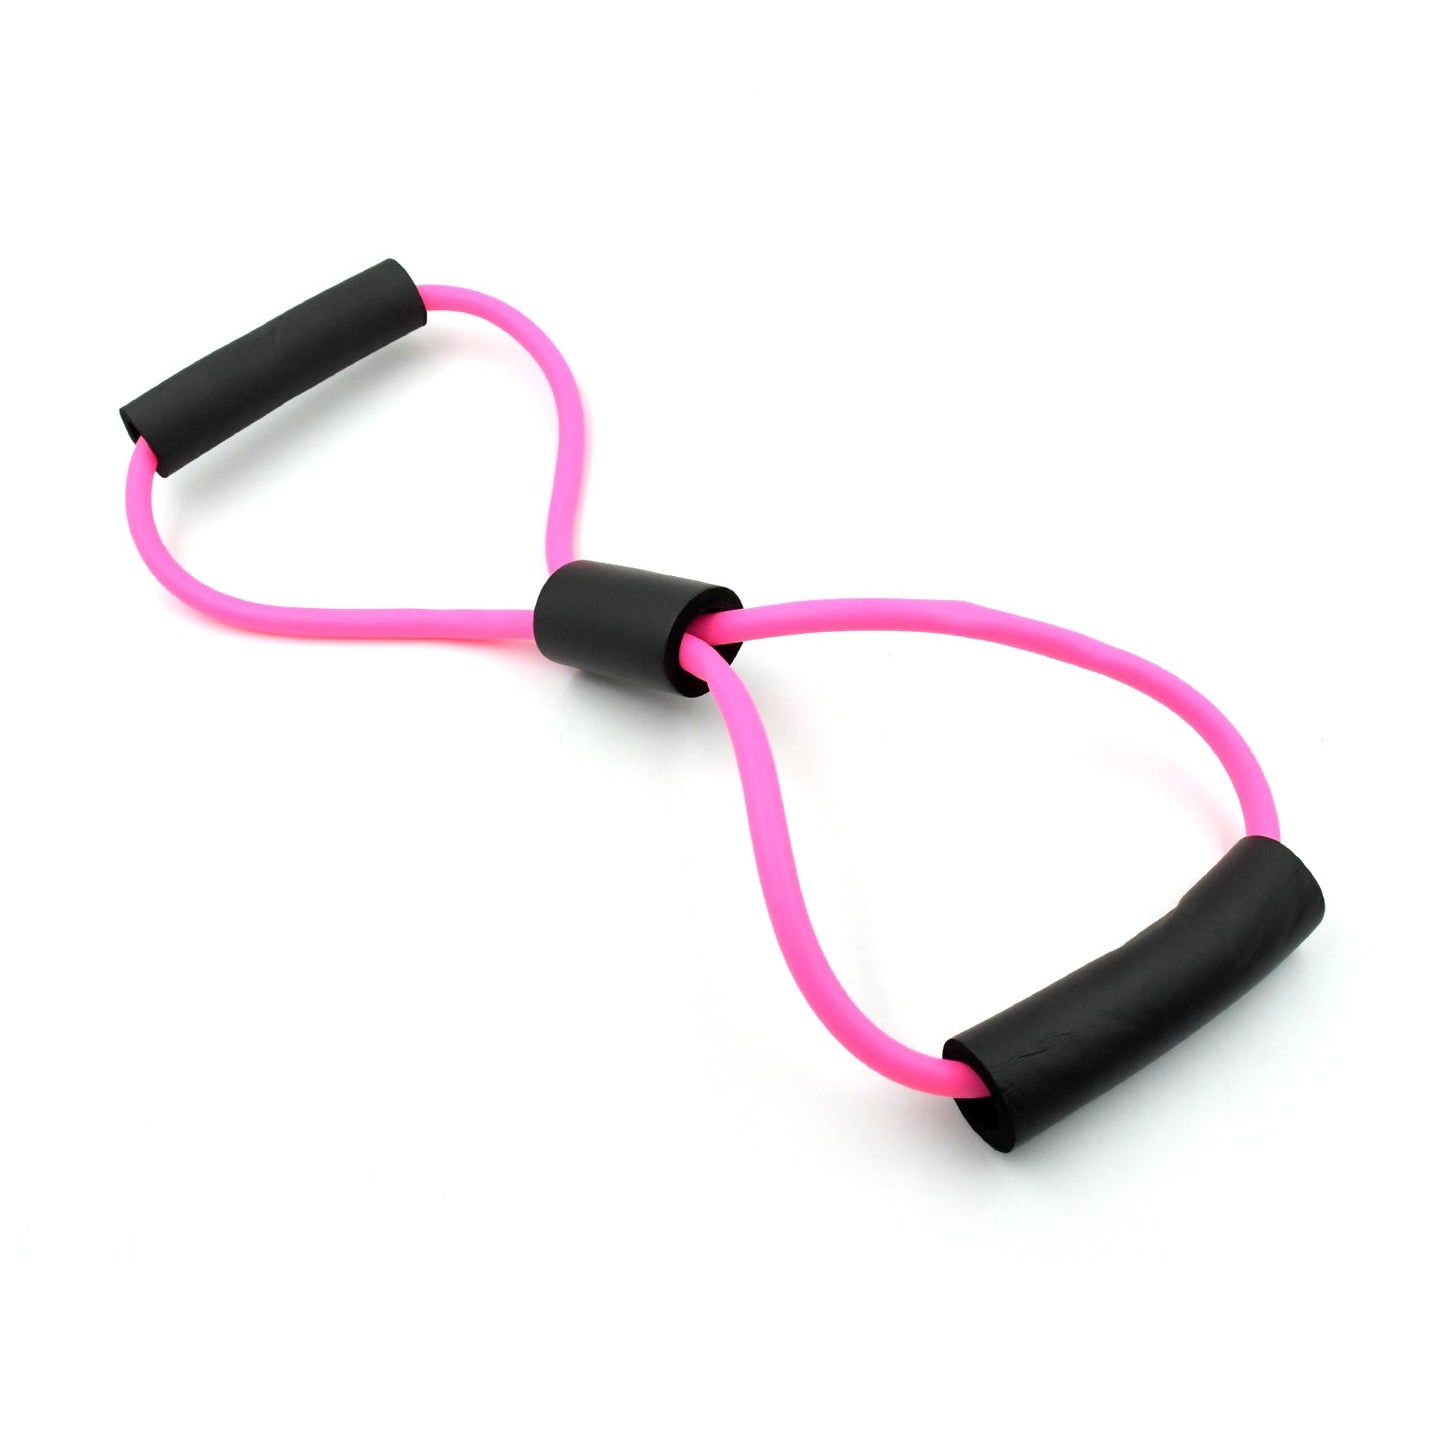 Sport Resistance Loop Band Yoga Bands Rubber Exercise Fitness Training Gym Strength Resistance Band 1 Pc